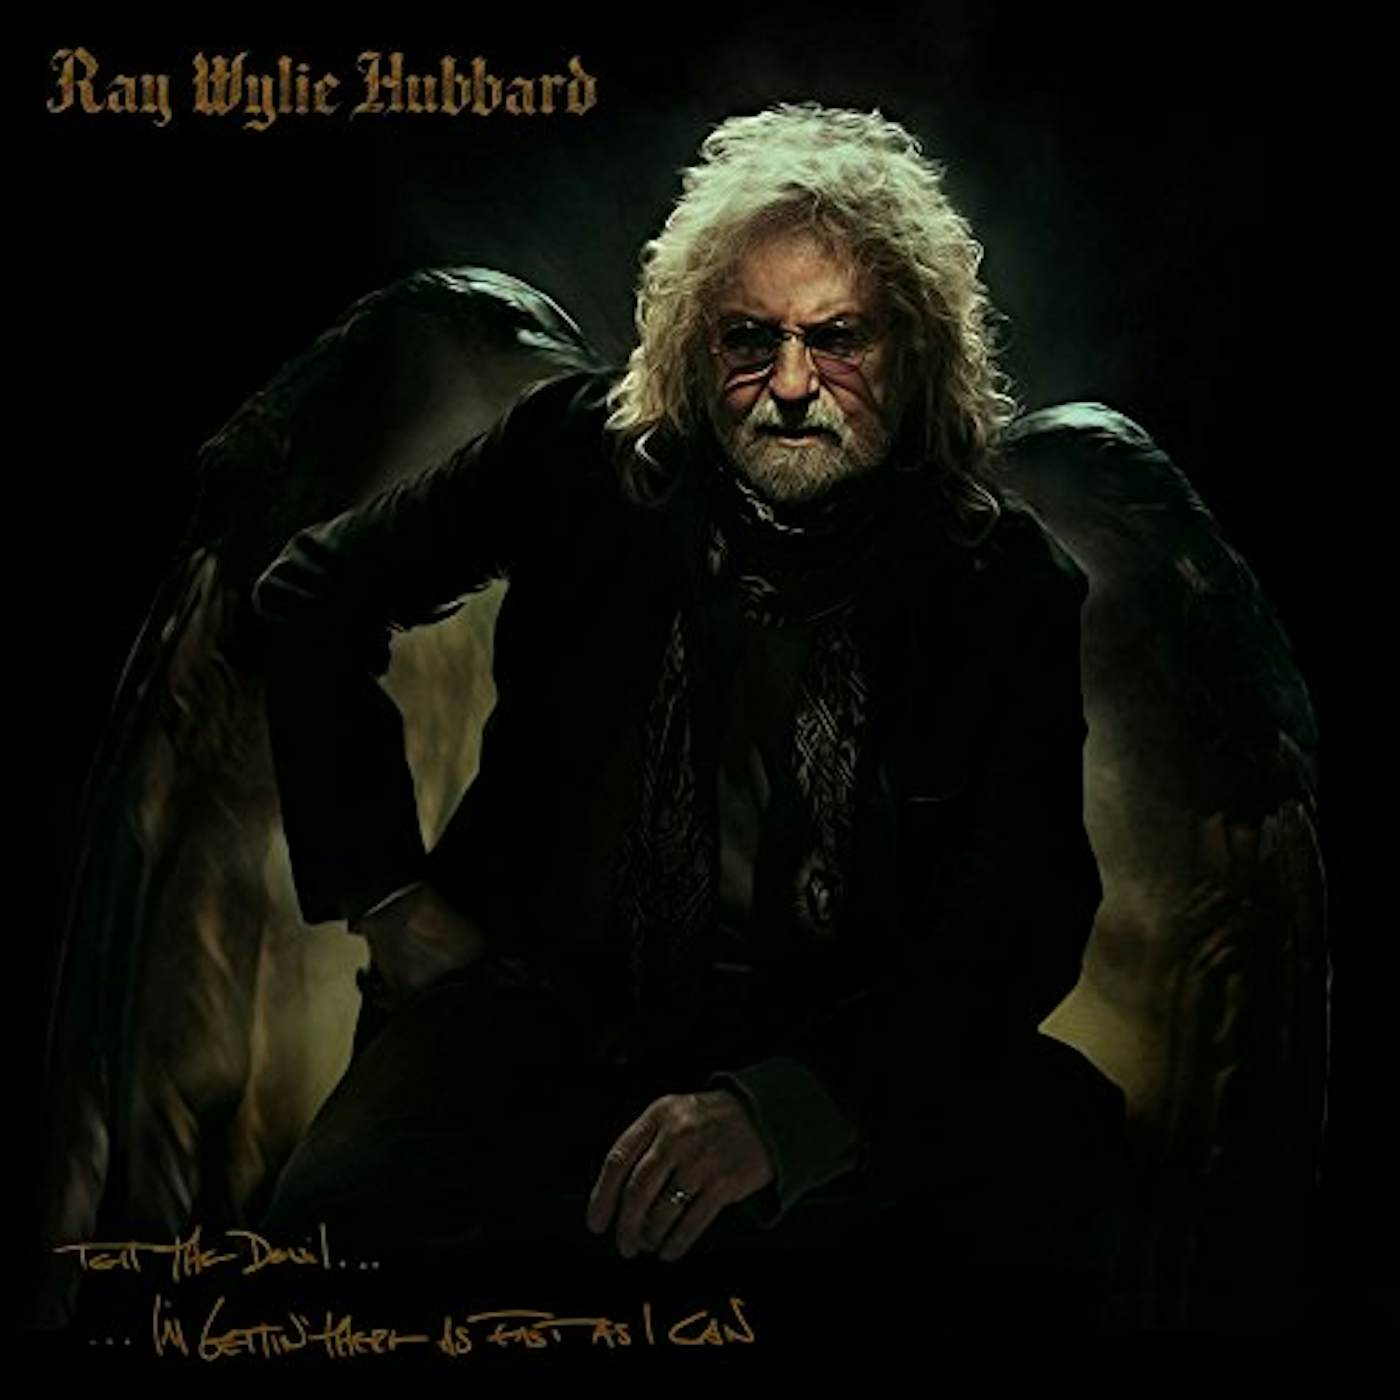 Ray Wylie Hubbard TELL THE DEVIL I'M GETTIN THERE AS FAST AS I CAN CD